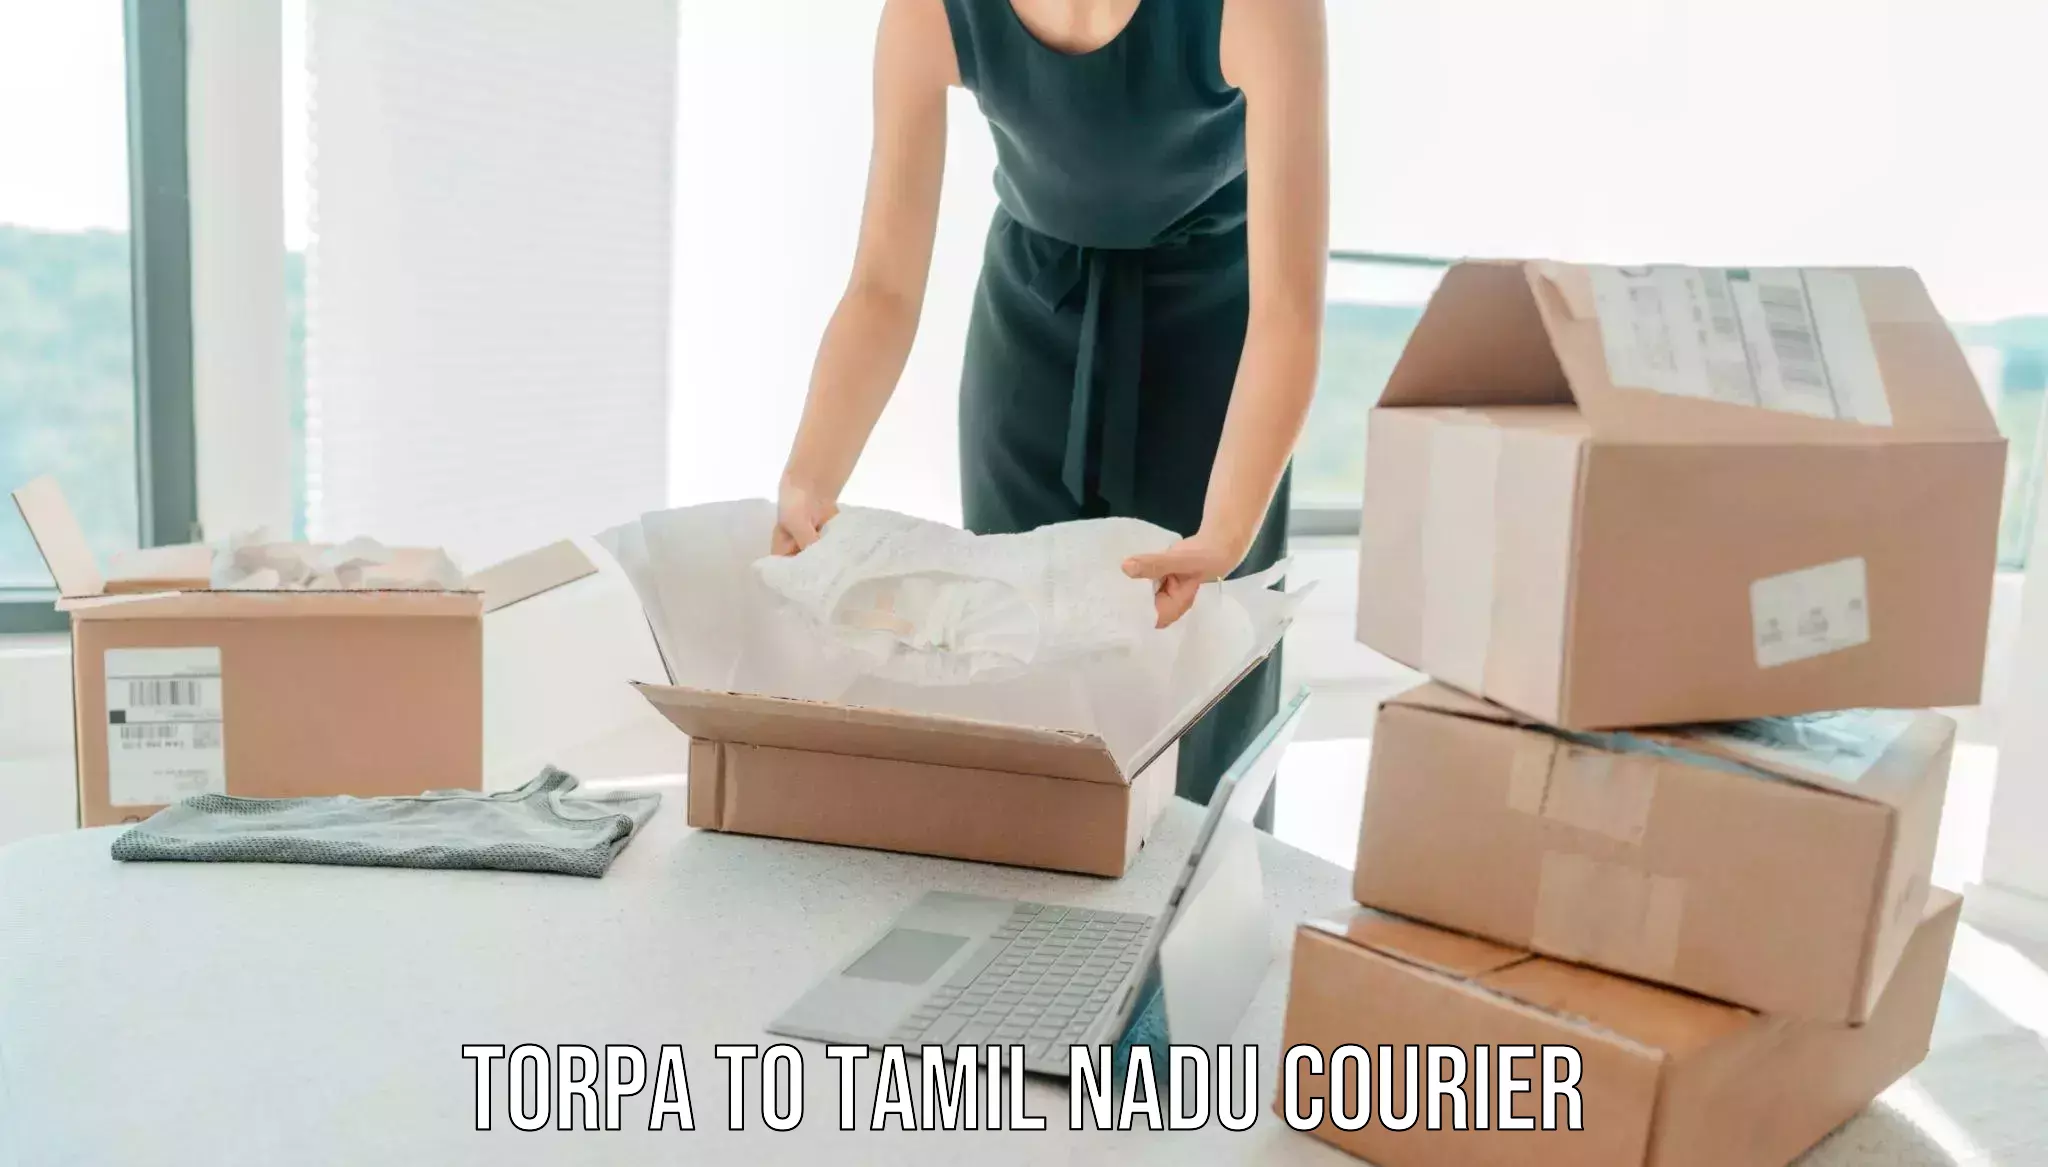 Trusted relocation experts Torpa to Tamil Nadu